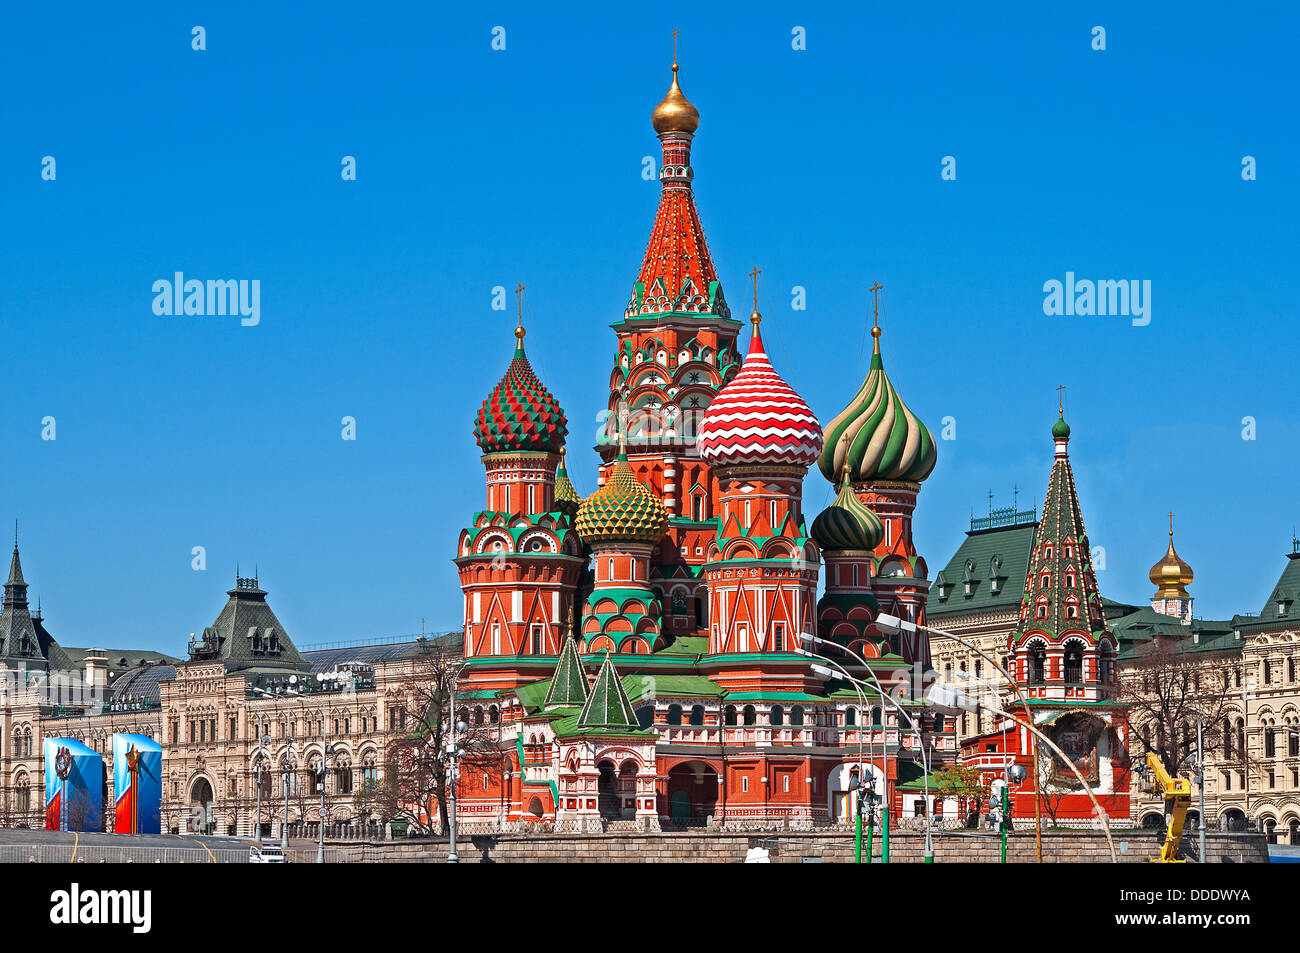 Moscow. Red Square. Saint Basil's Cathedral. The Cathedral of the Protection of Most Holy Theotokos on the Moat Stock Photo